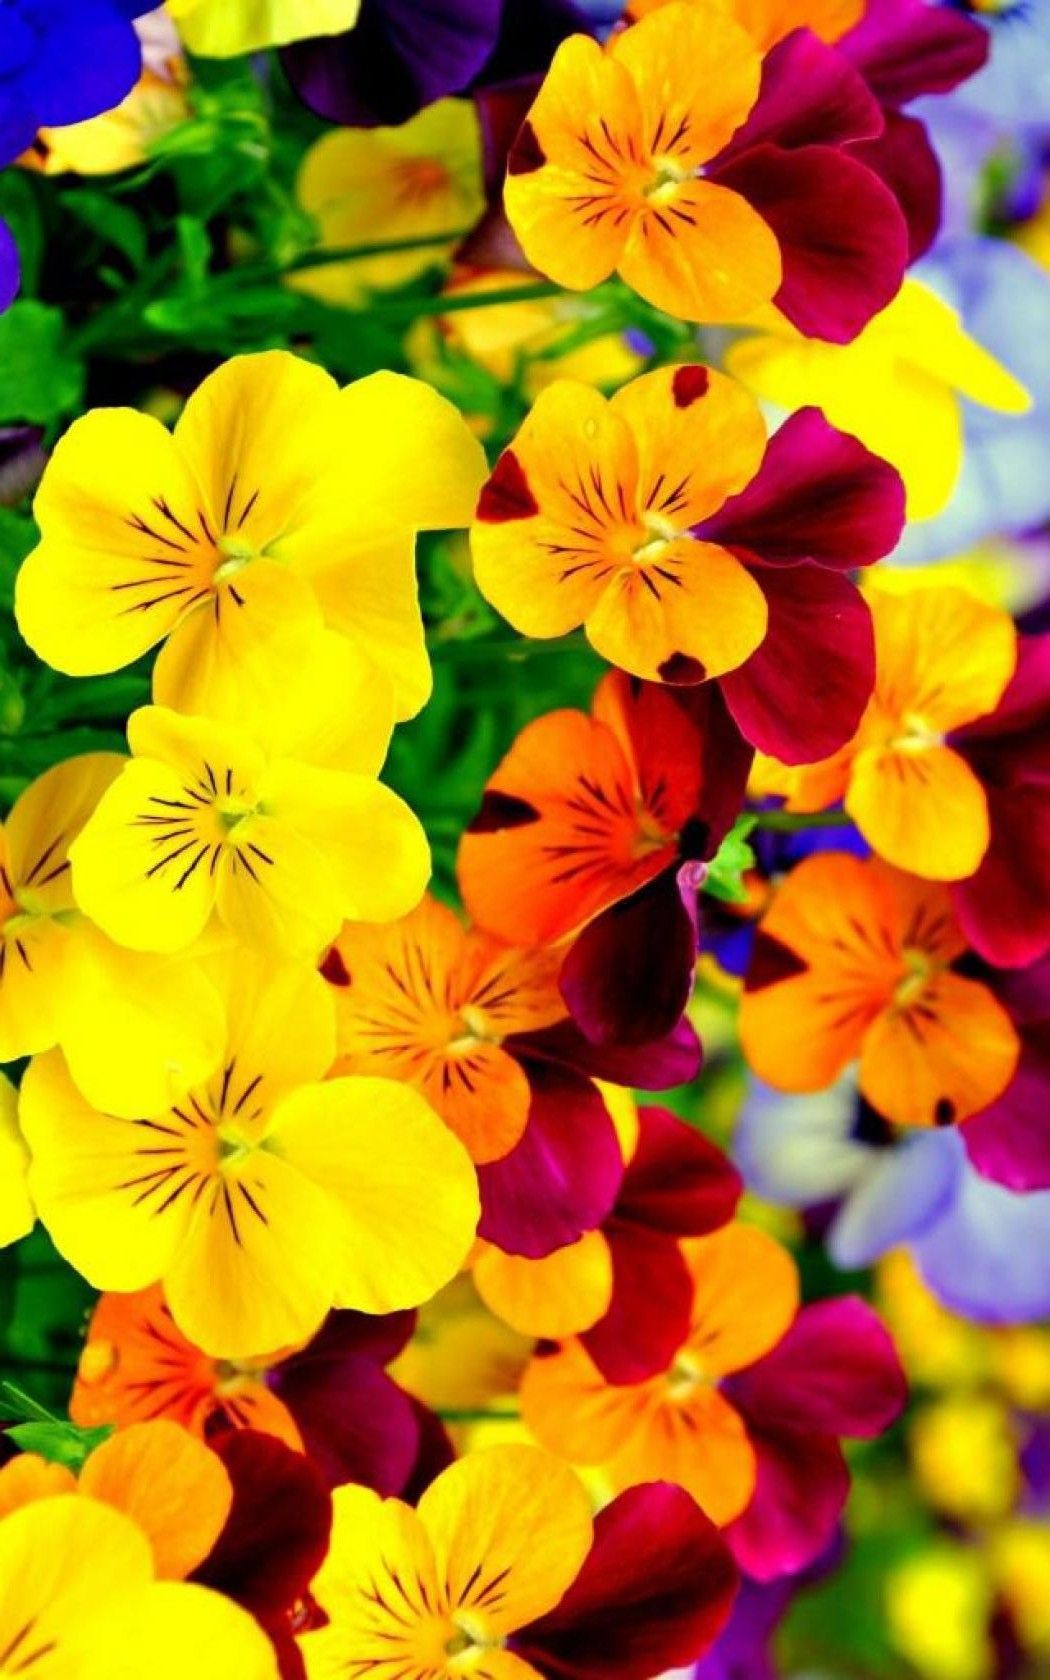 Bright Flowers Wallpaper iPhone iPhone Wallpaper. Flower wallpaper, Flower background iphone, Flower picture